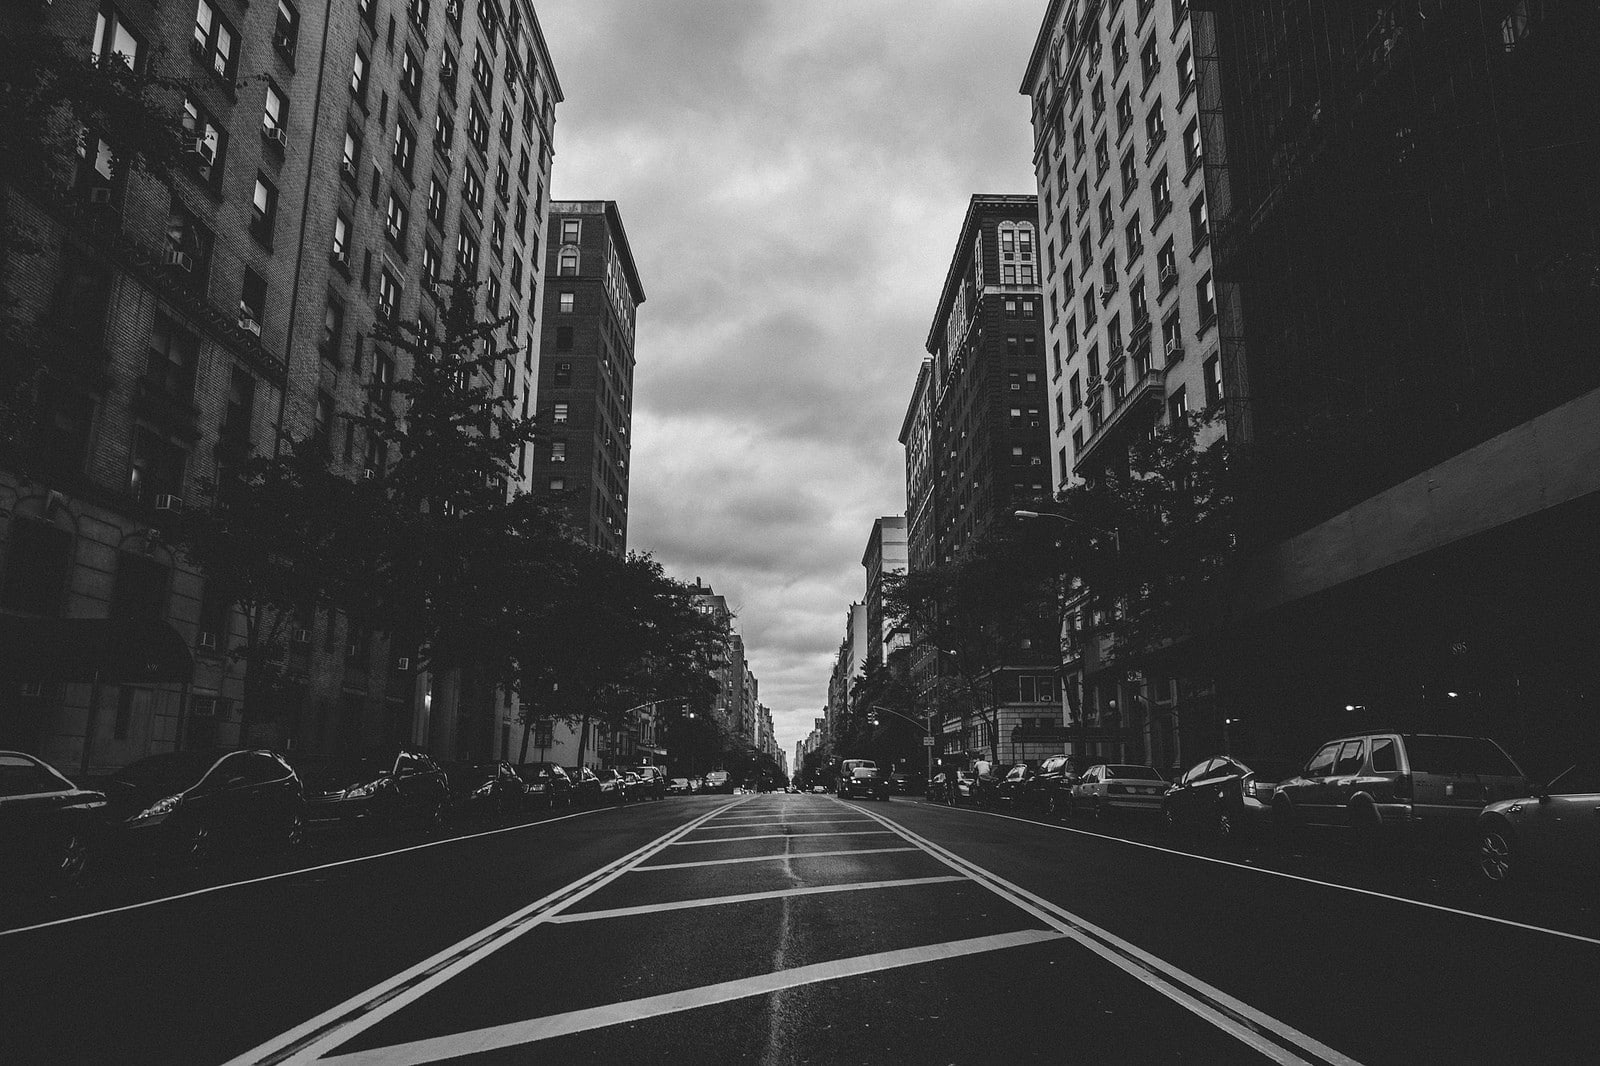 City, Street, Cars, Trees, Black And White, city buildings gray scale photo